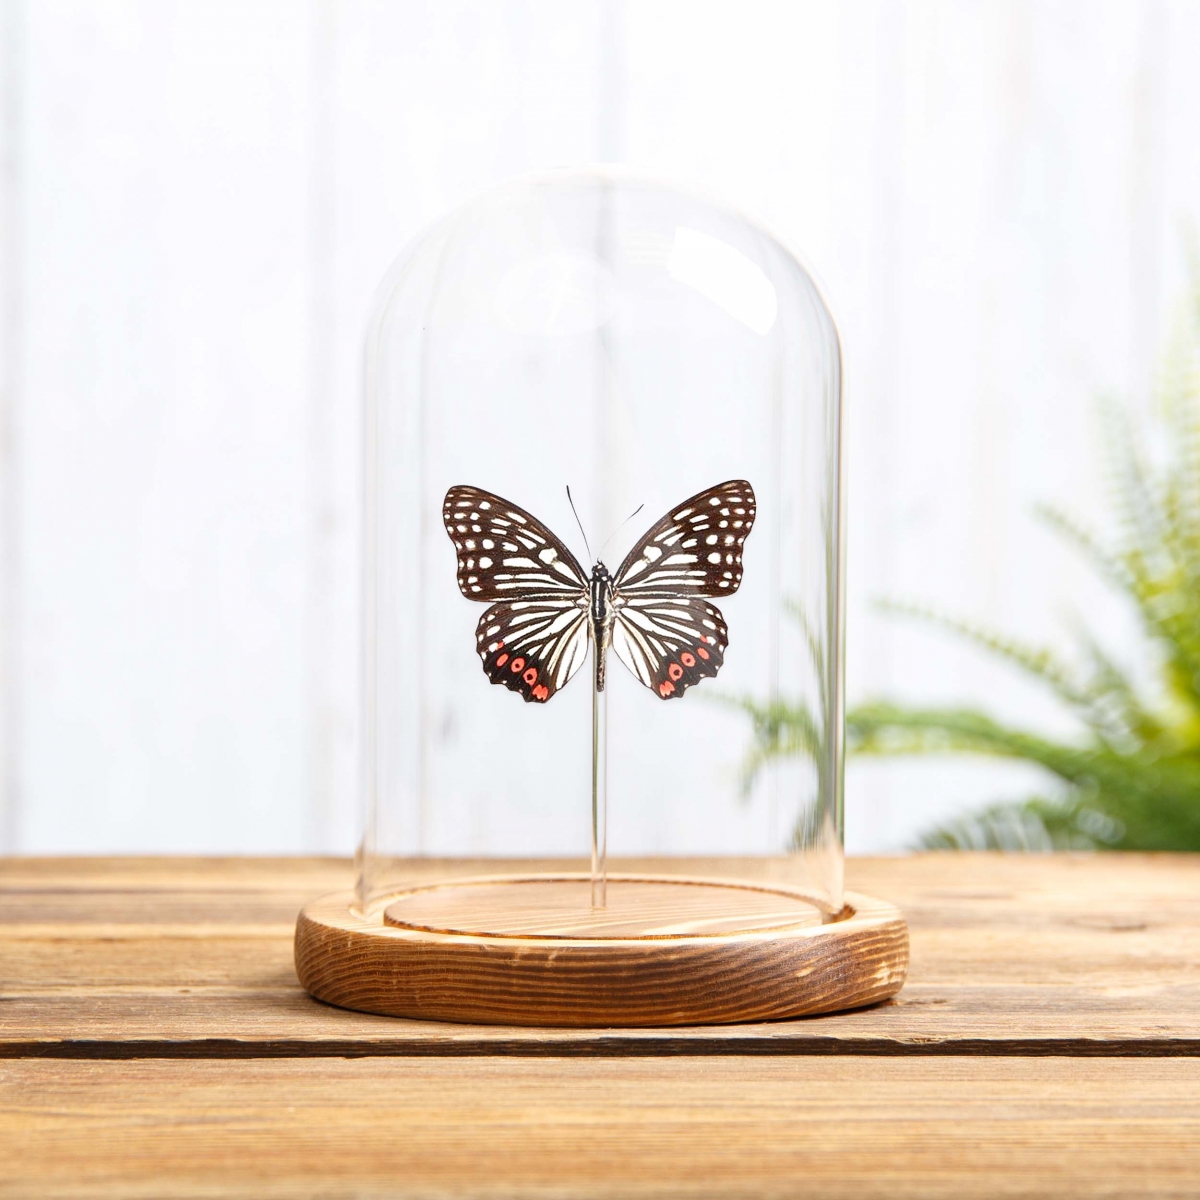 Red Ring Skirt in Glass Dome with Wooden Base (Hestina assimilis)